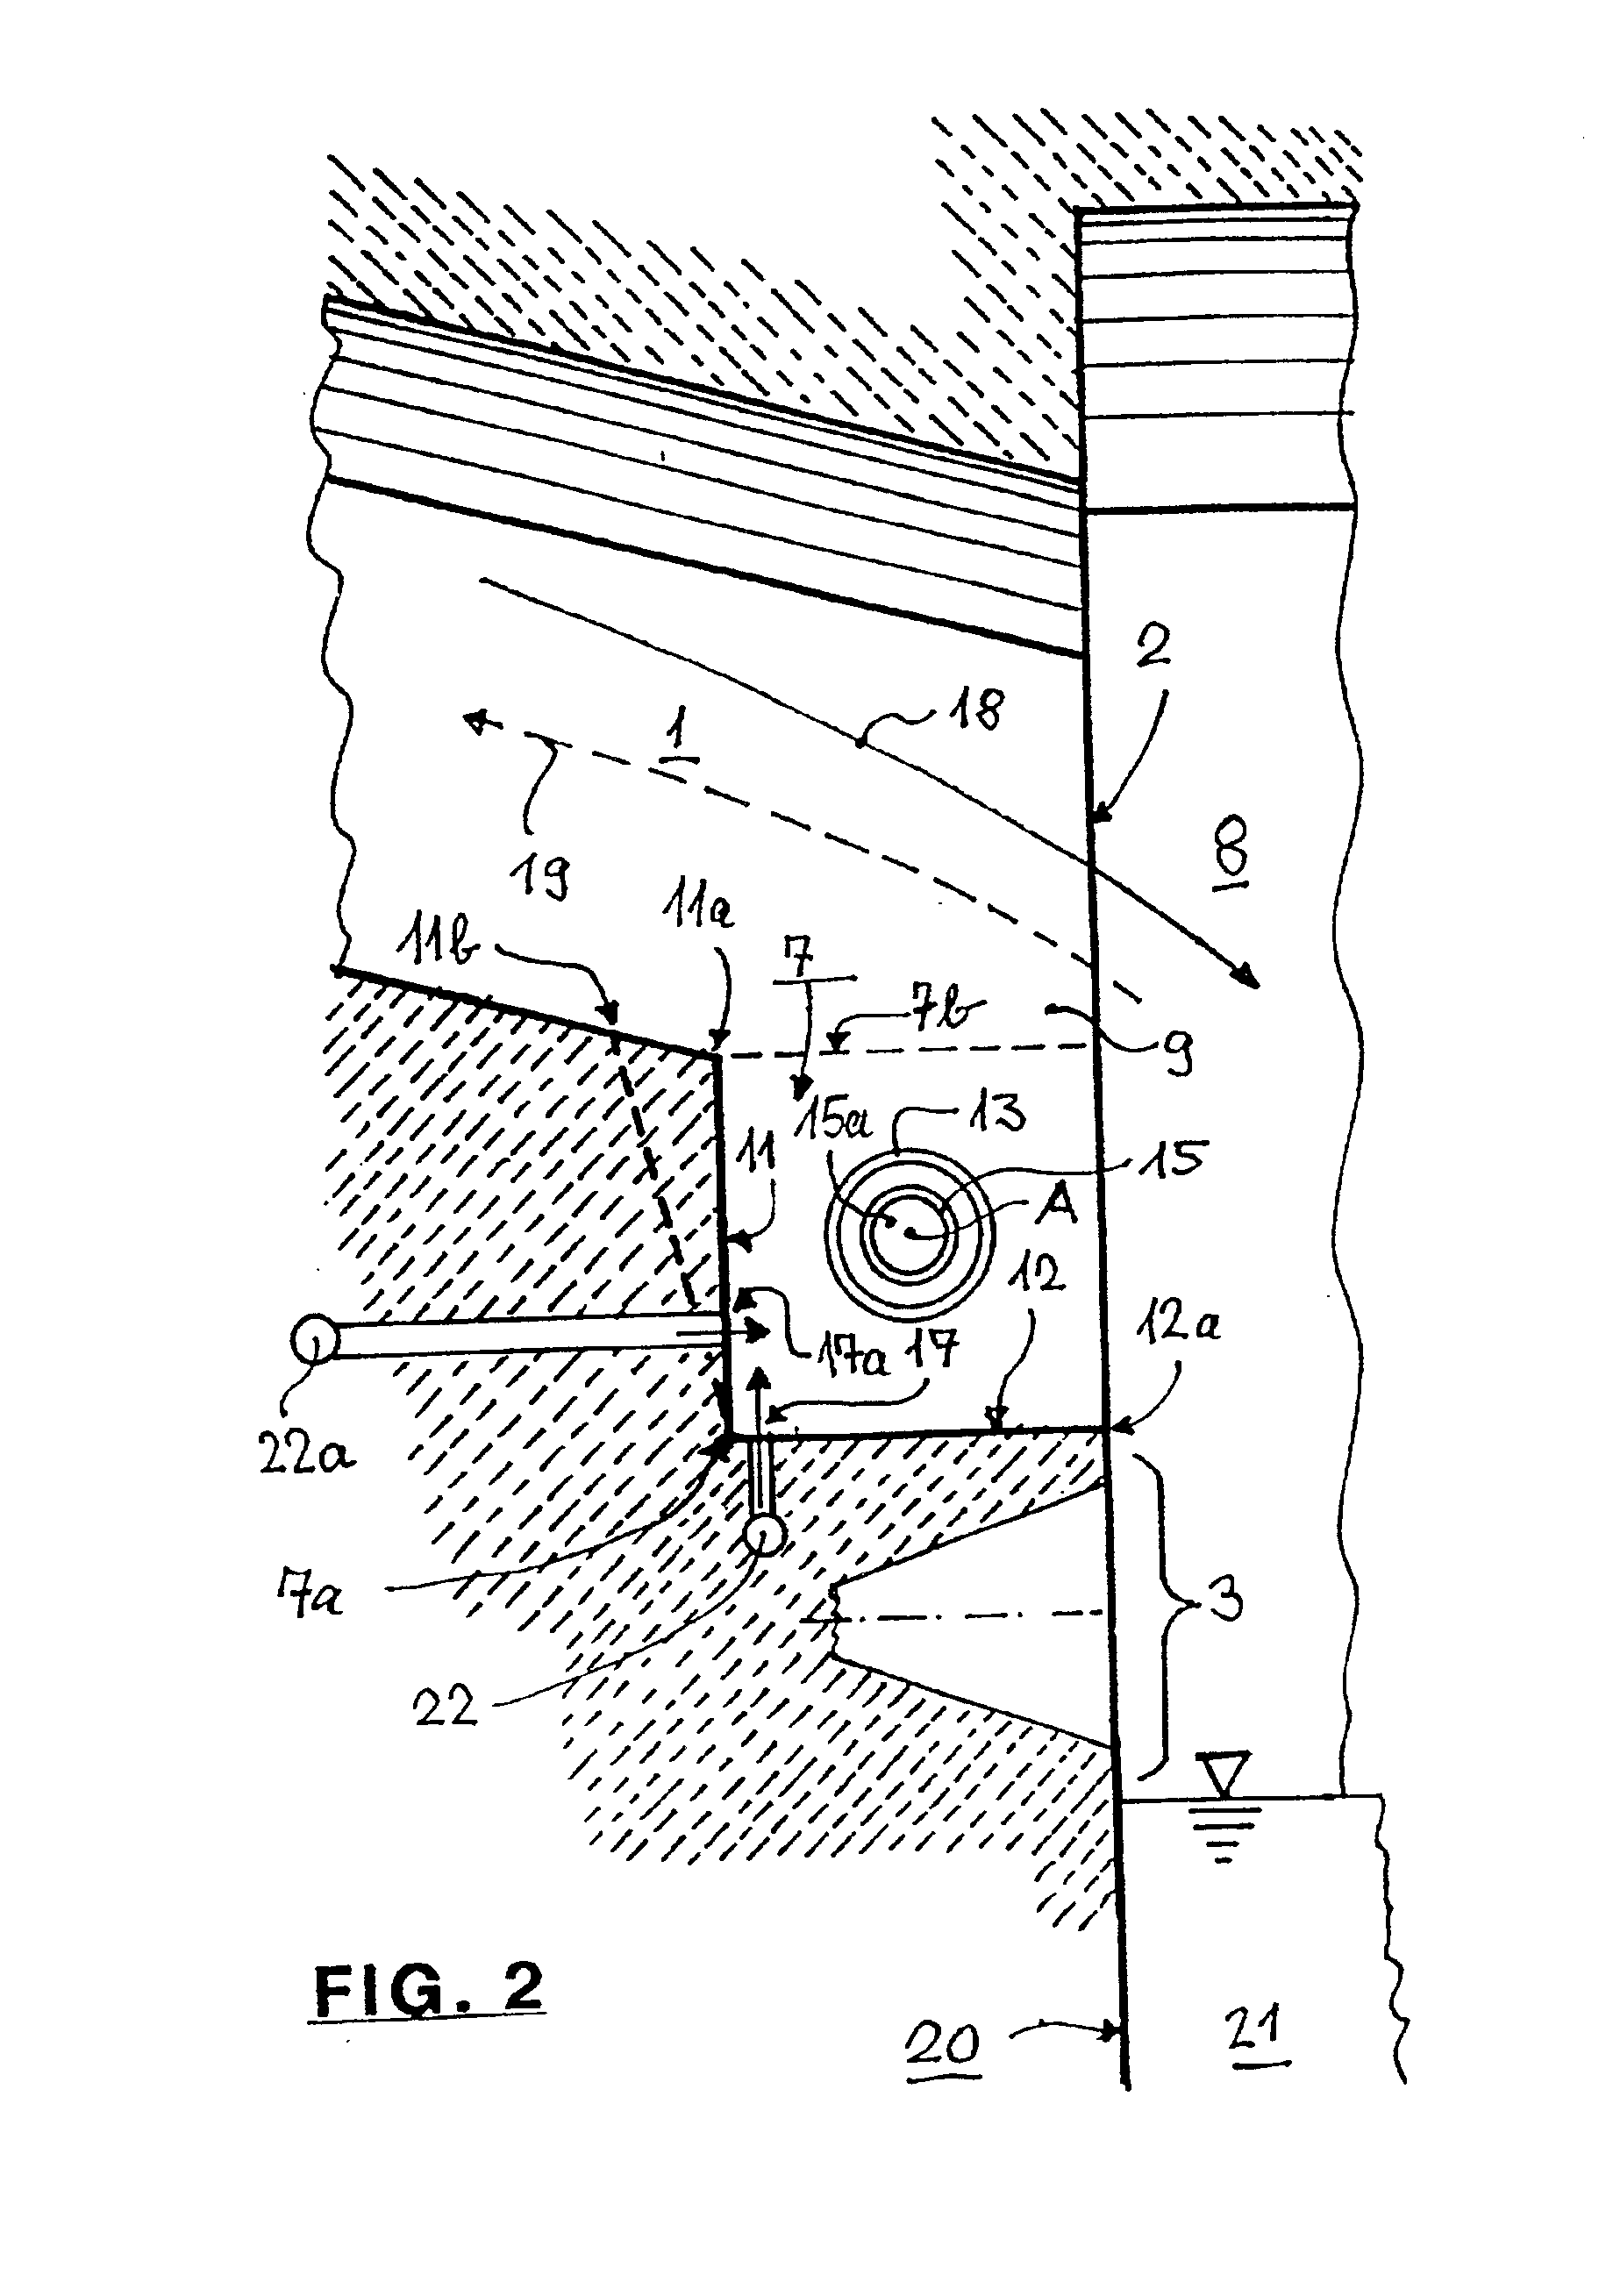 Method and apparatus for heating glass melting furnaces with fossil fuels